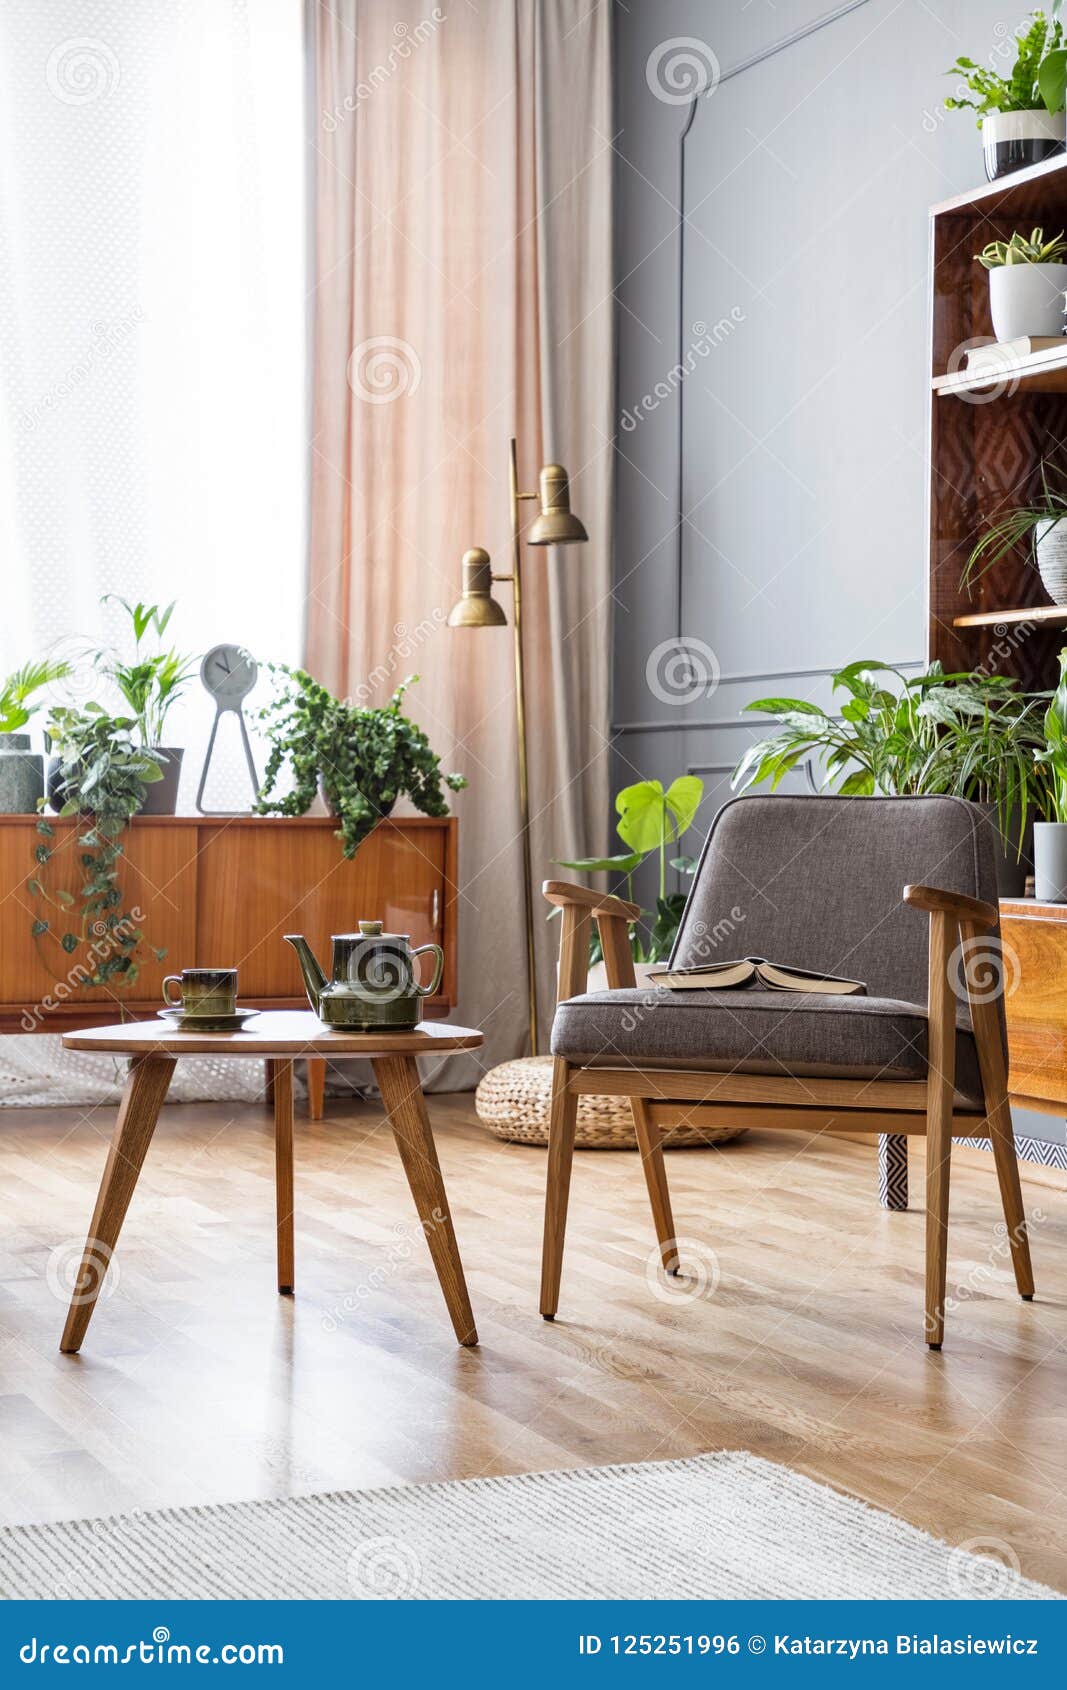 Wooden Table Next To Grey Armchair In Vintage Living Room 